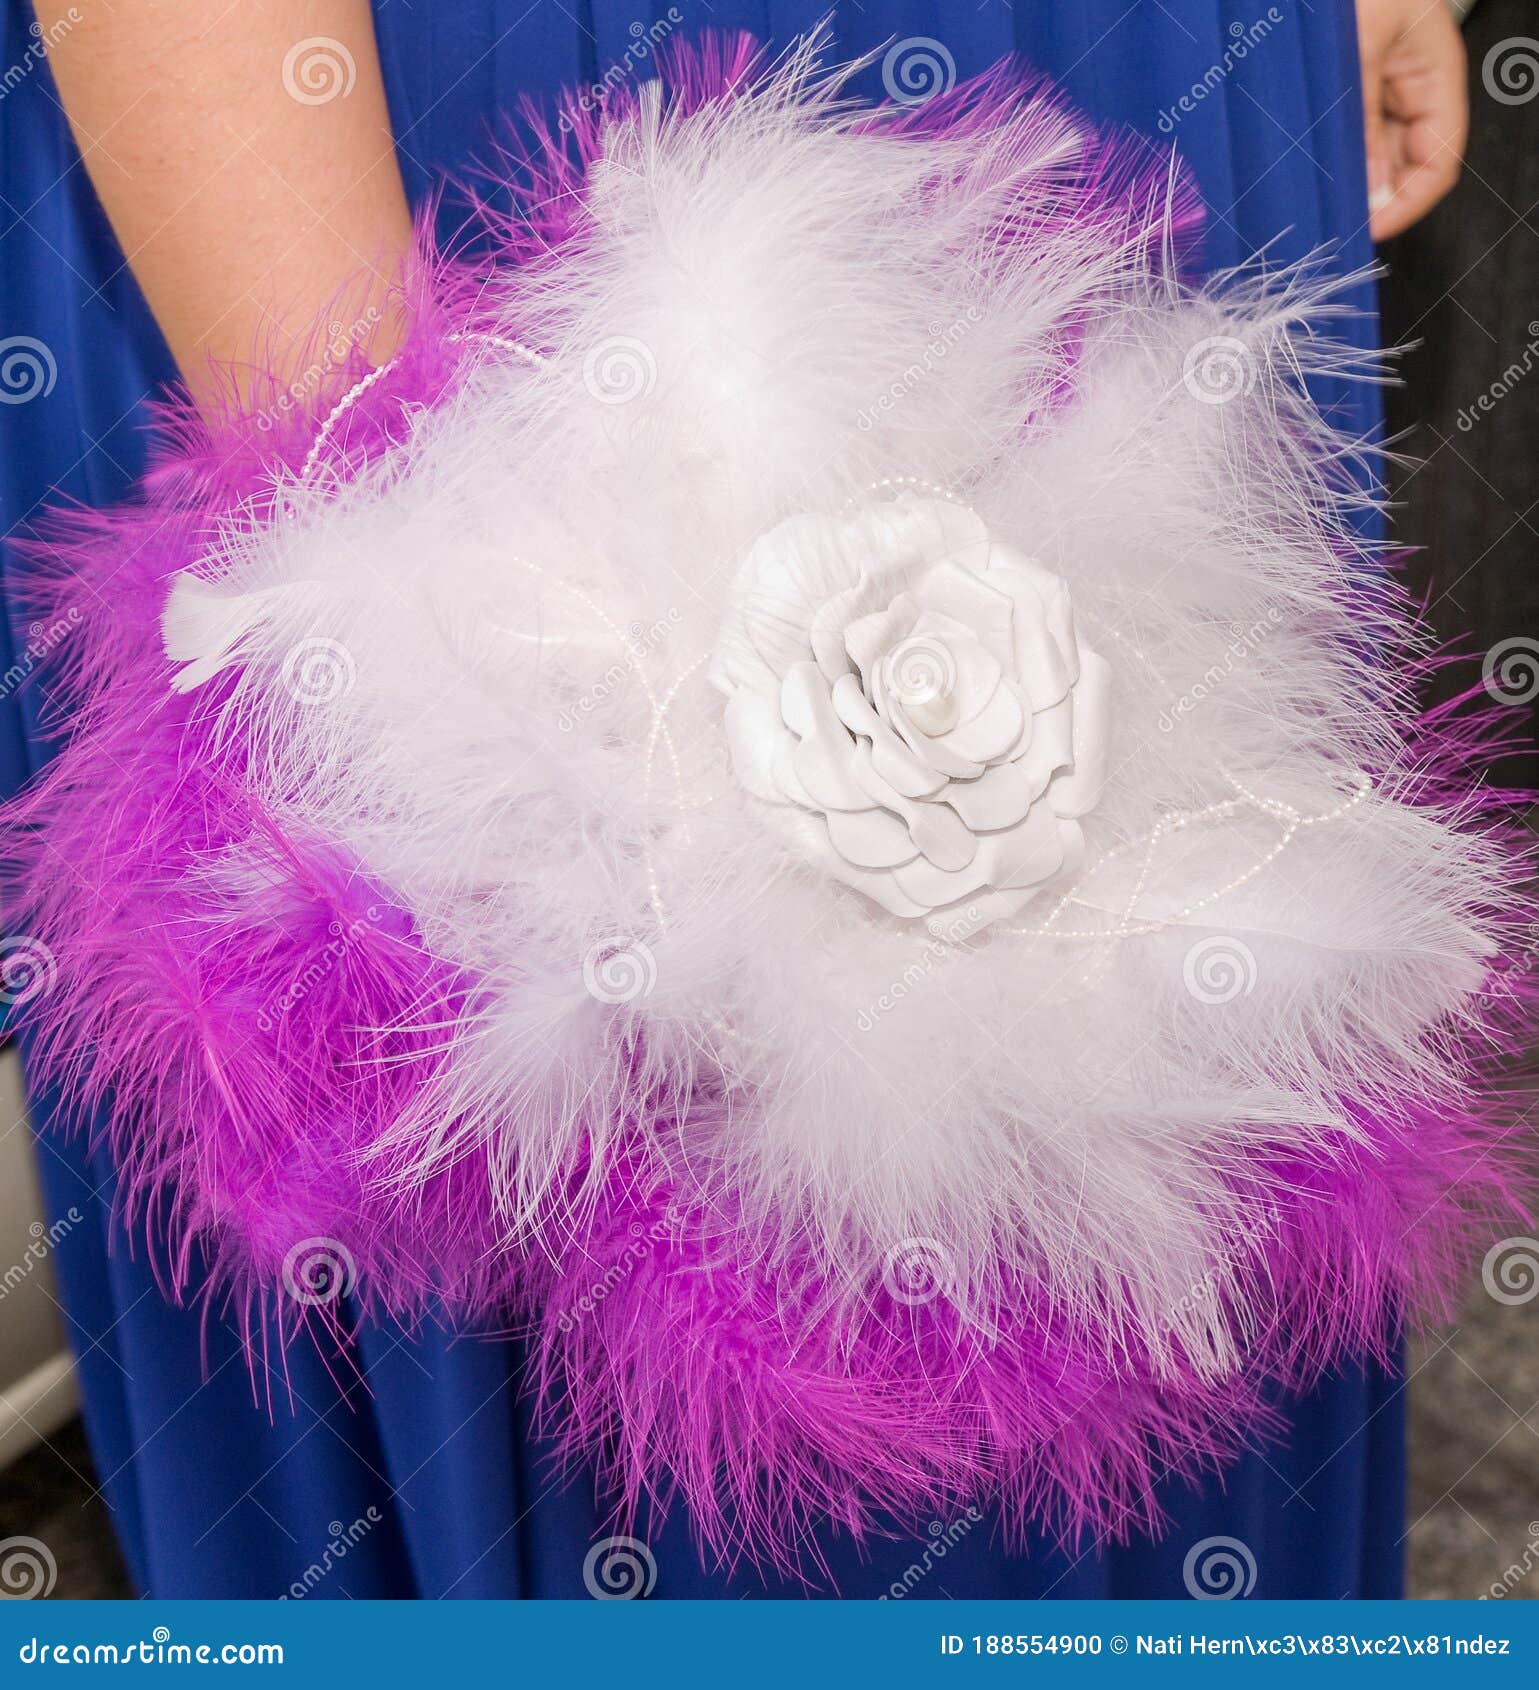 soft bouquet in the hand of a bride made with white and purple feathers with a fabric flower in the center